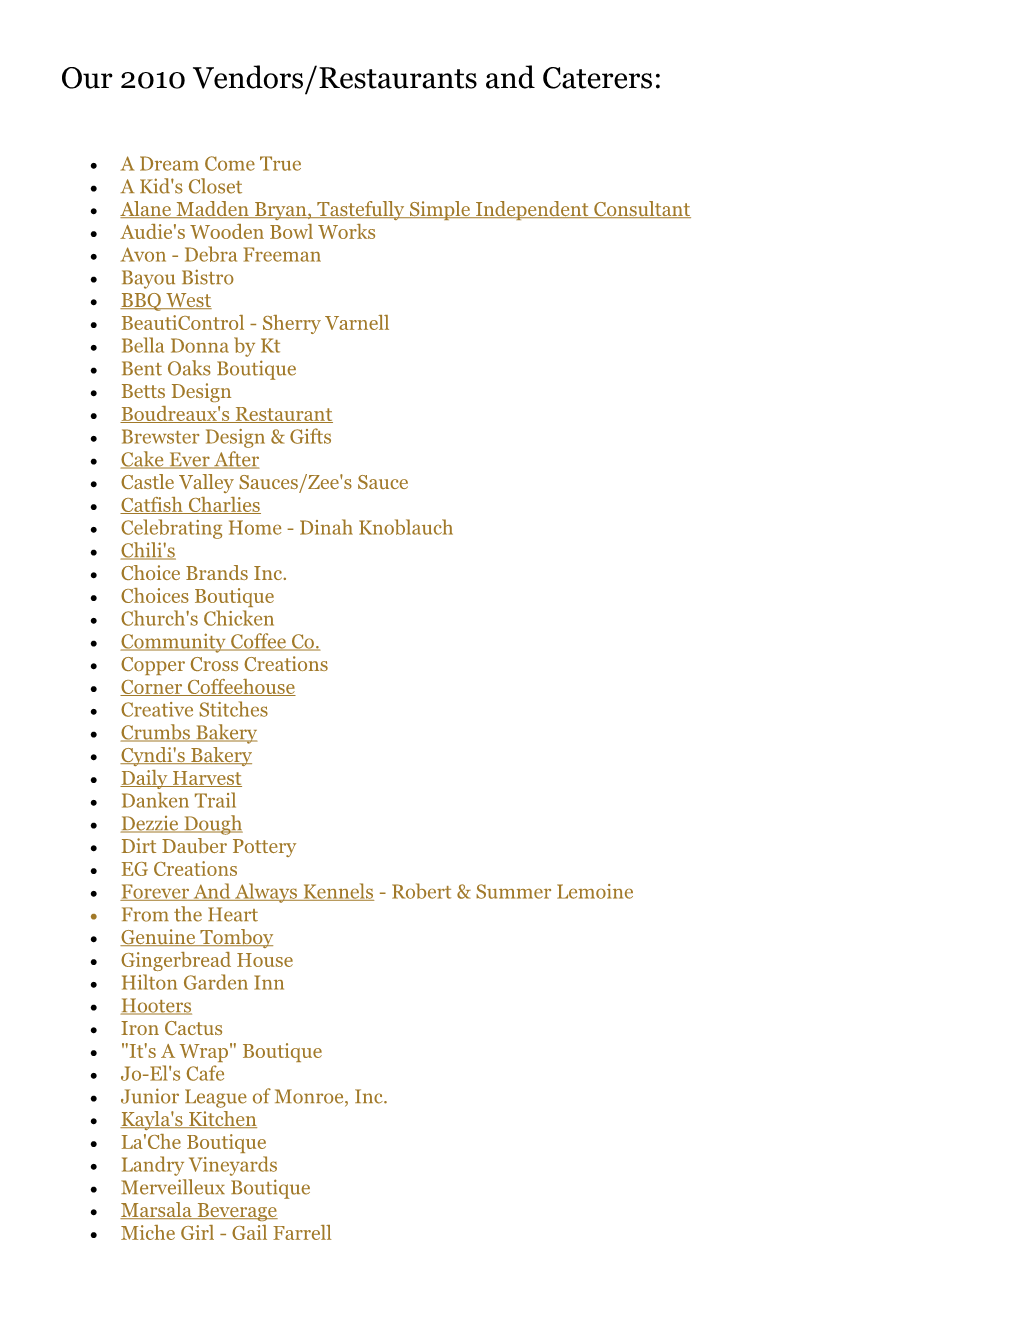 Our 2010 Vendors/Restaurants and Caterers